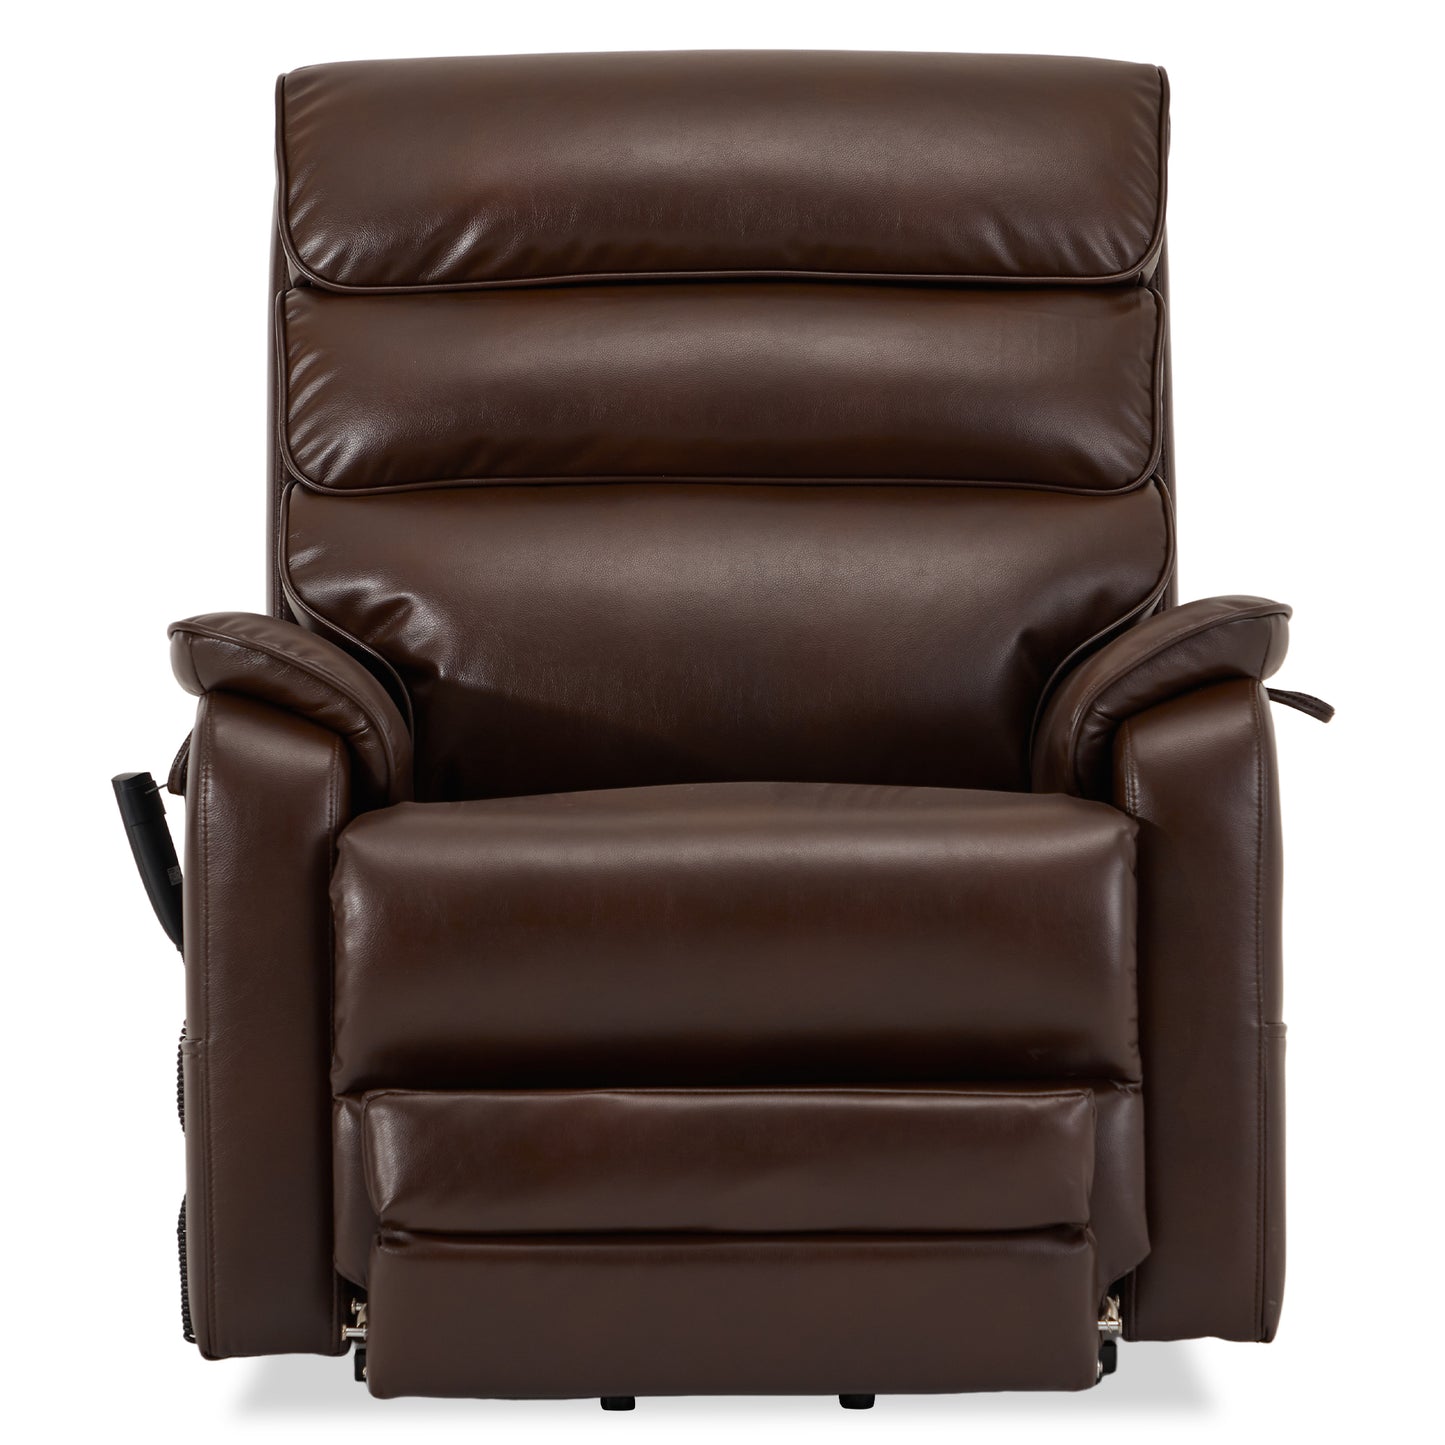 Big Man Lift Chair With Heat&Massage And Infinite Positions